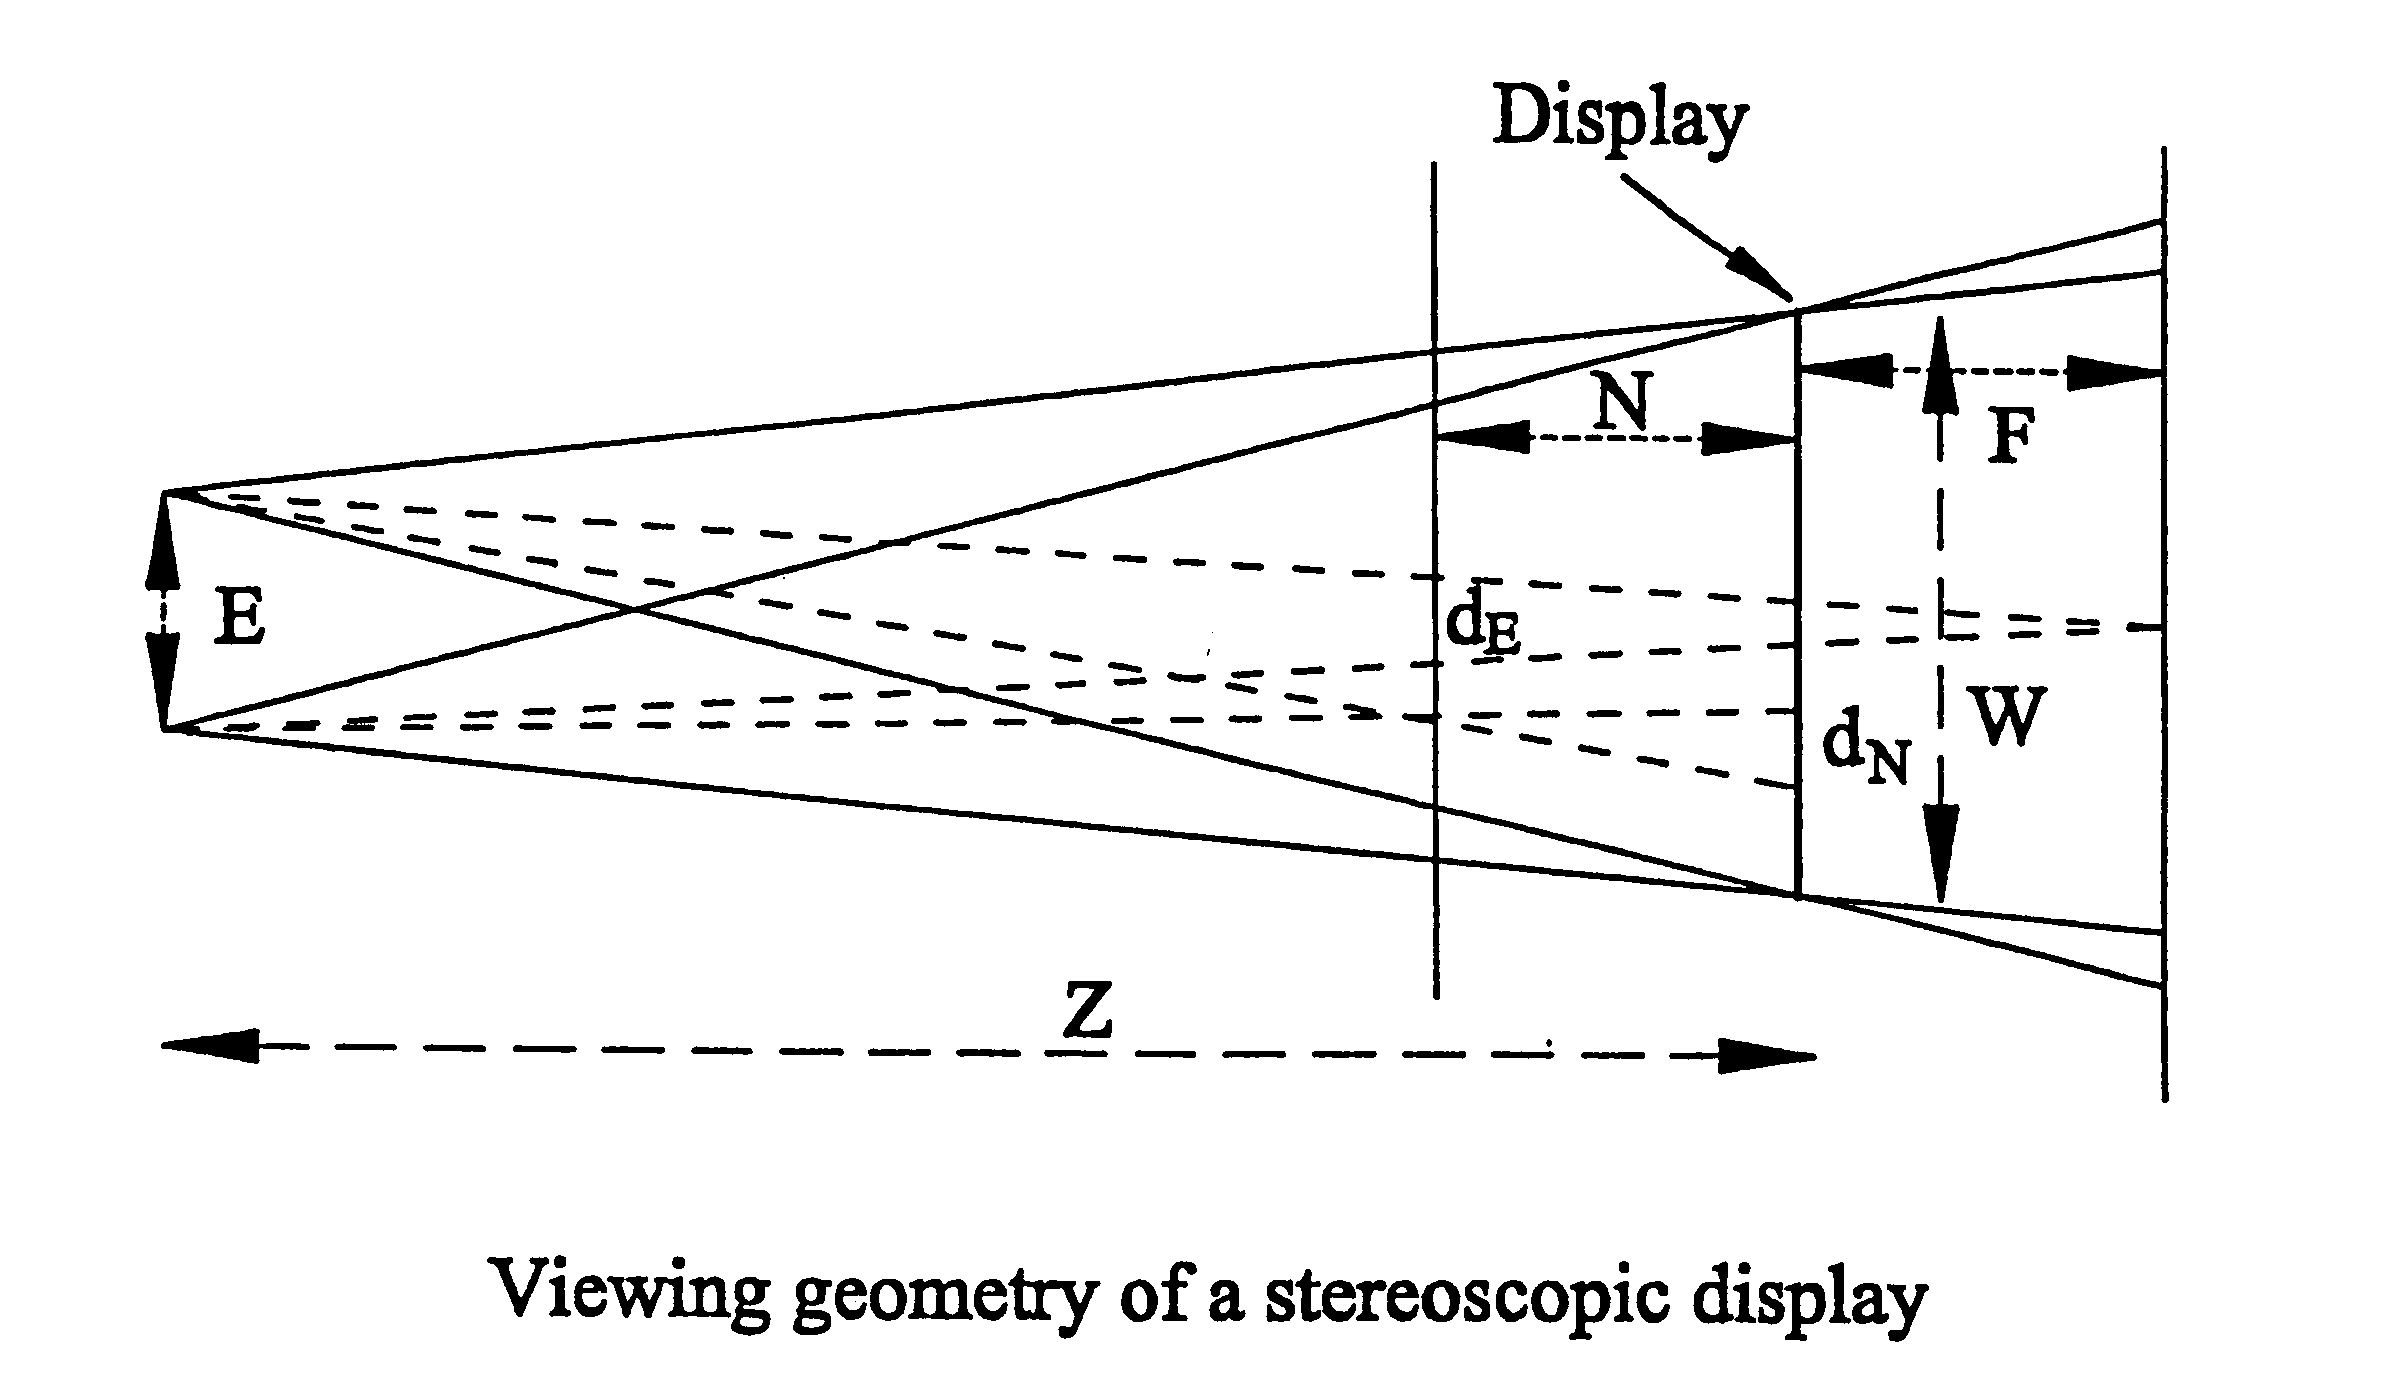 Stereo images with comfortable perceived depth